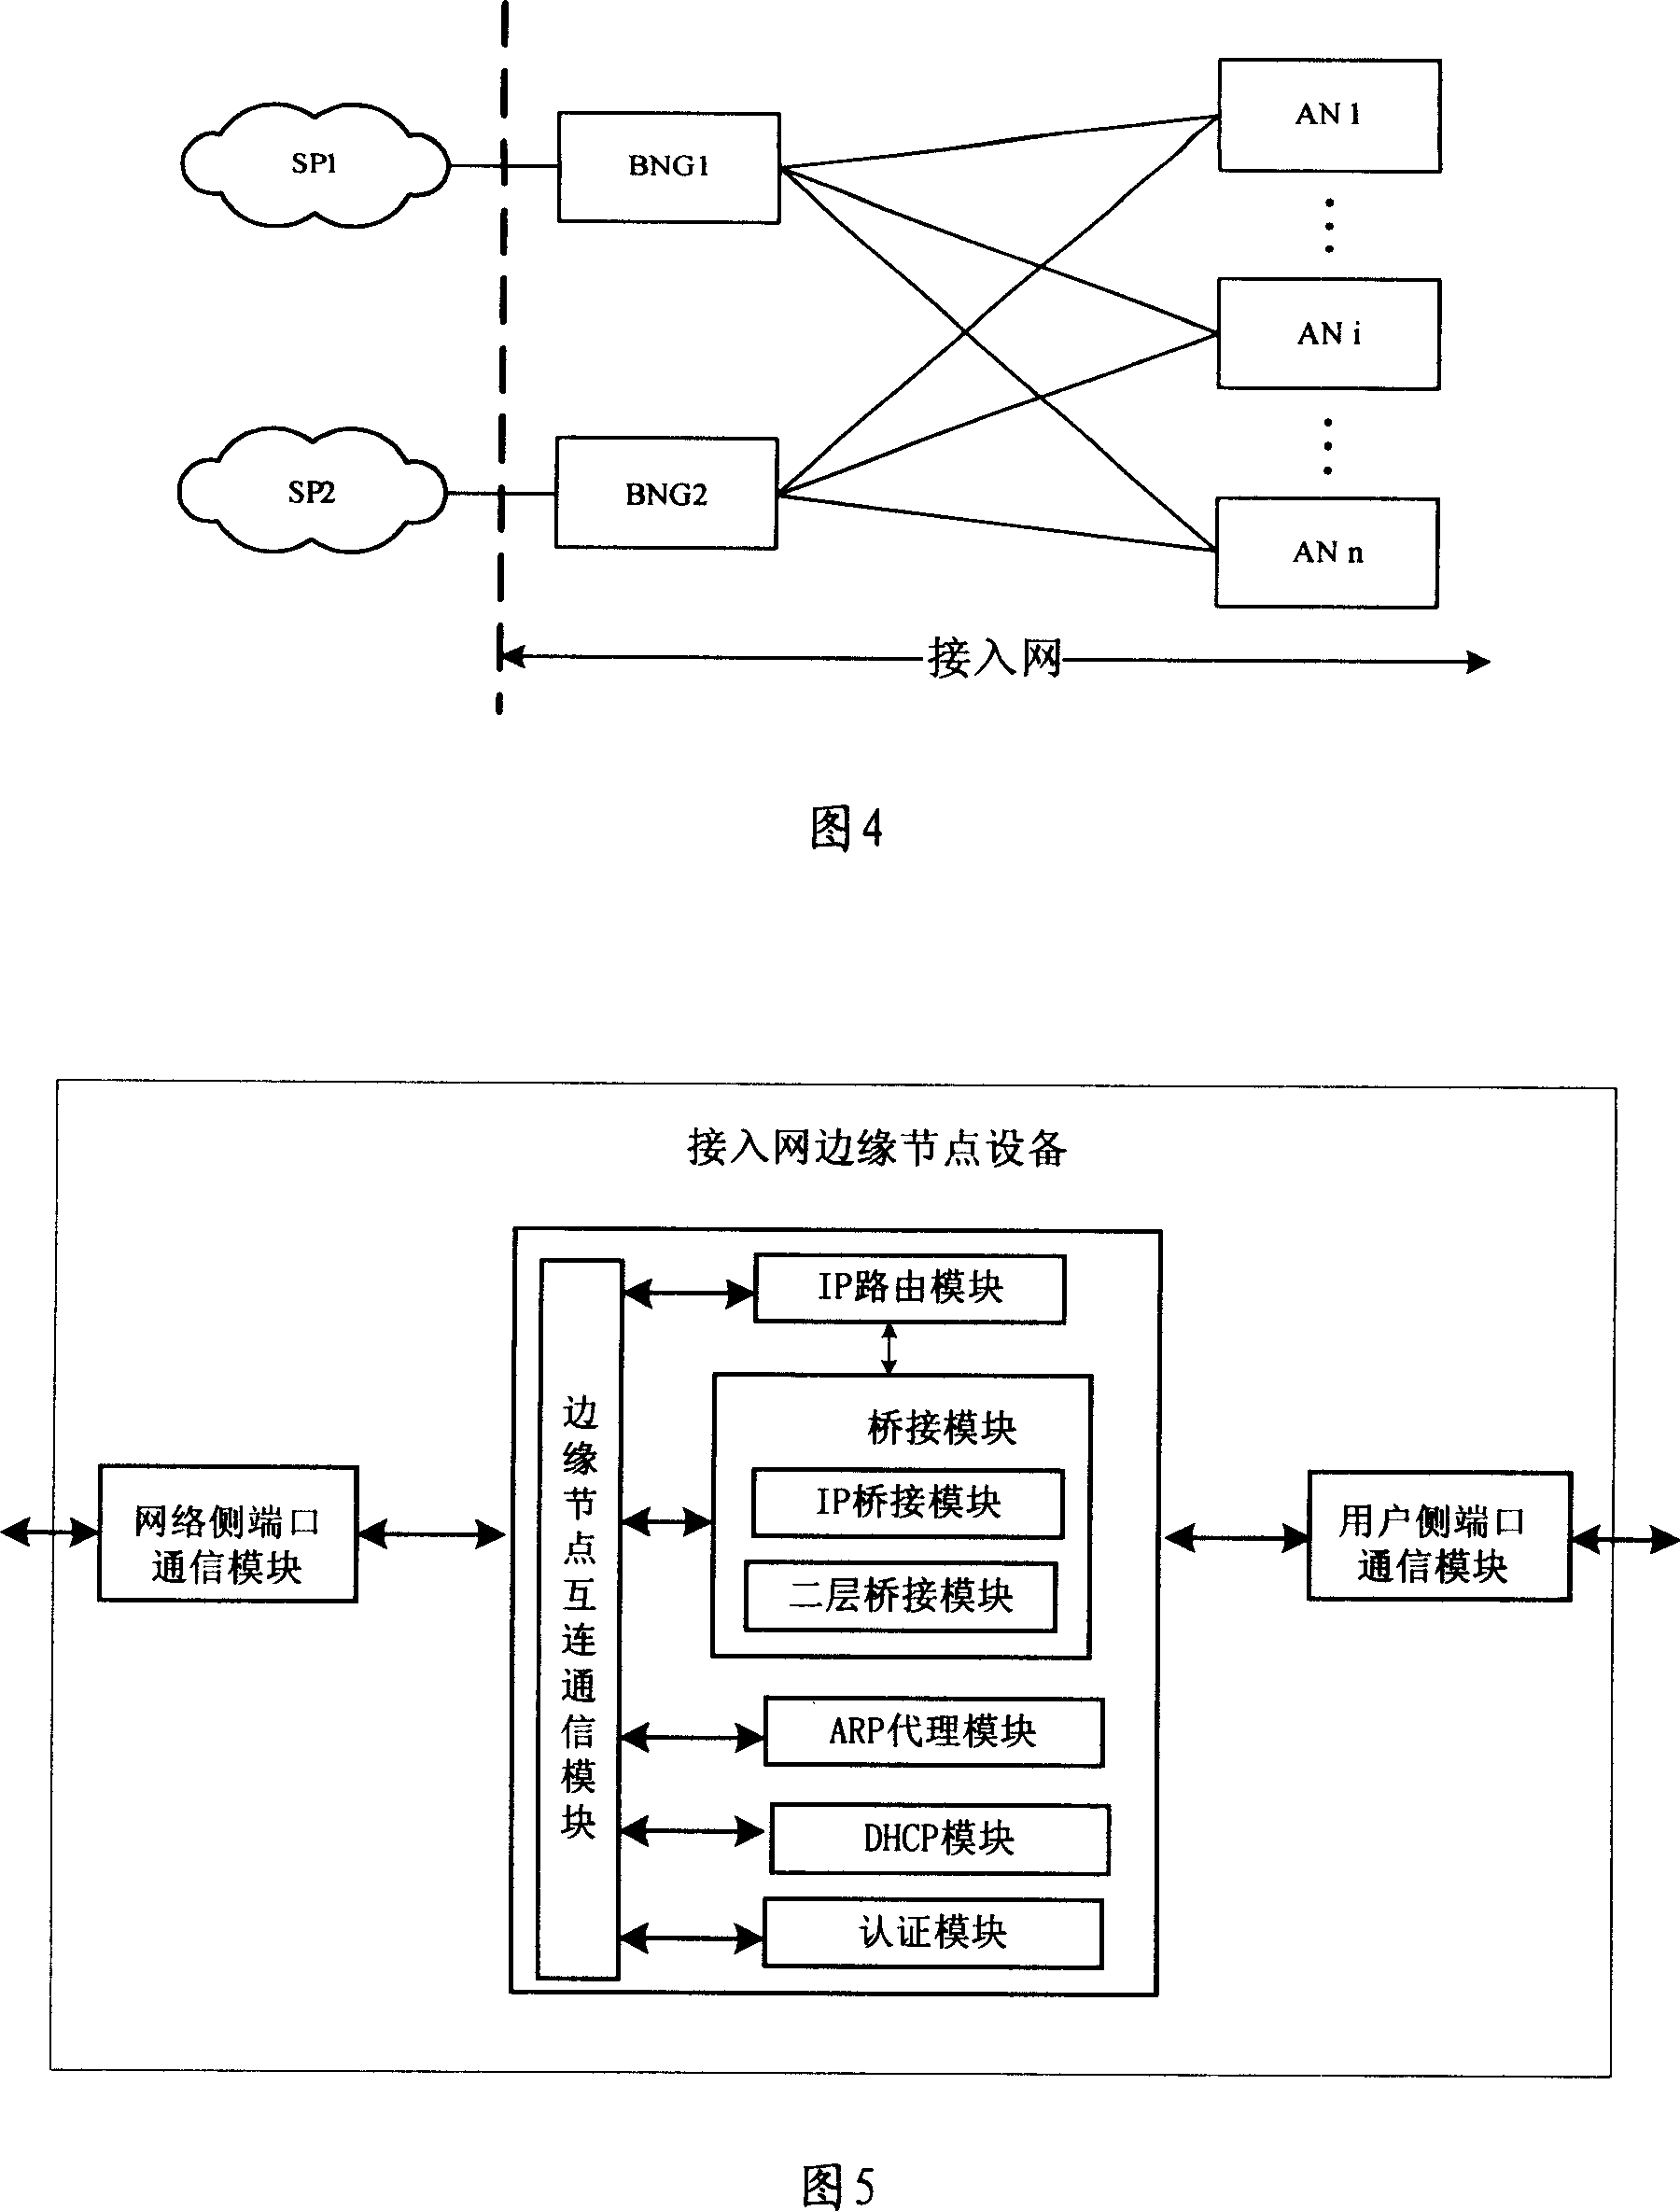 Multi-service and multi-edge device and system